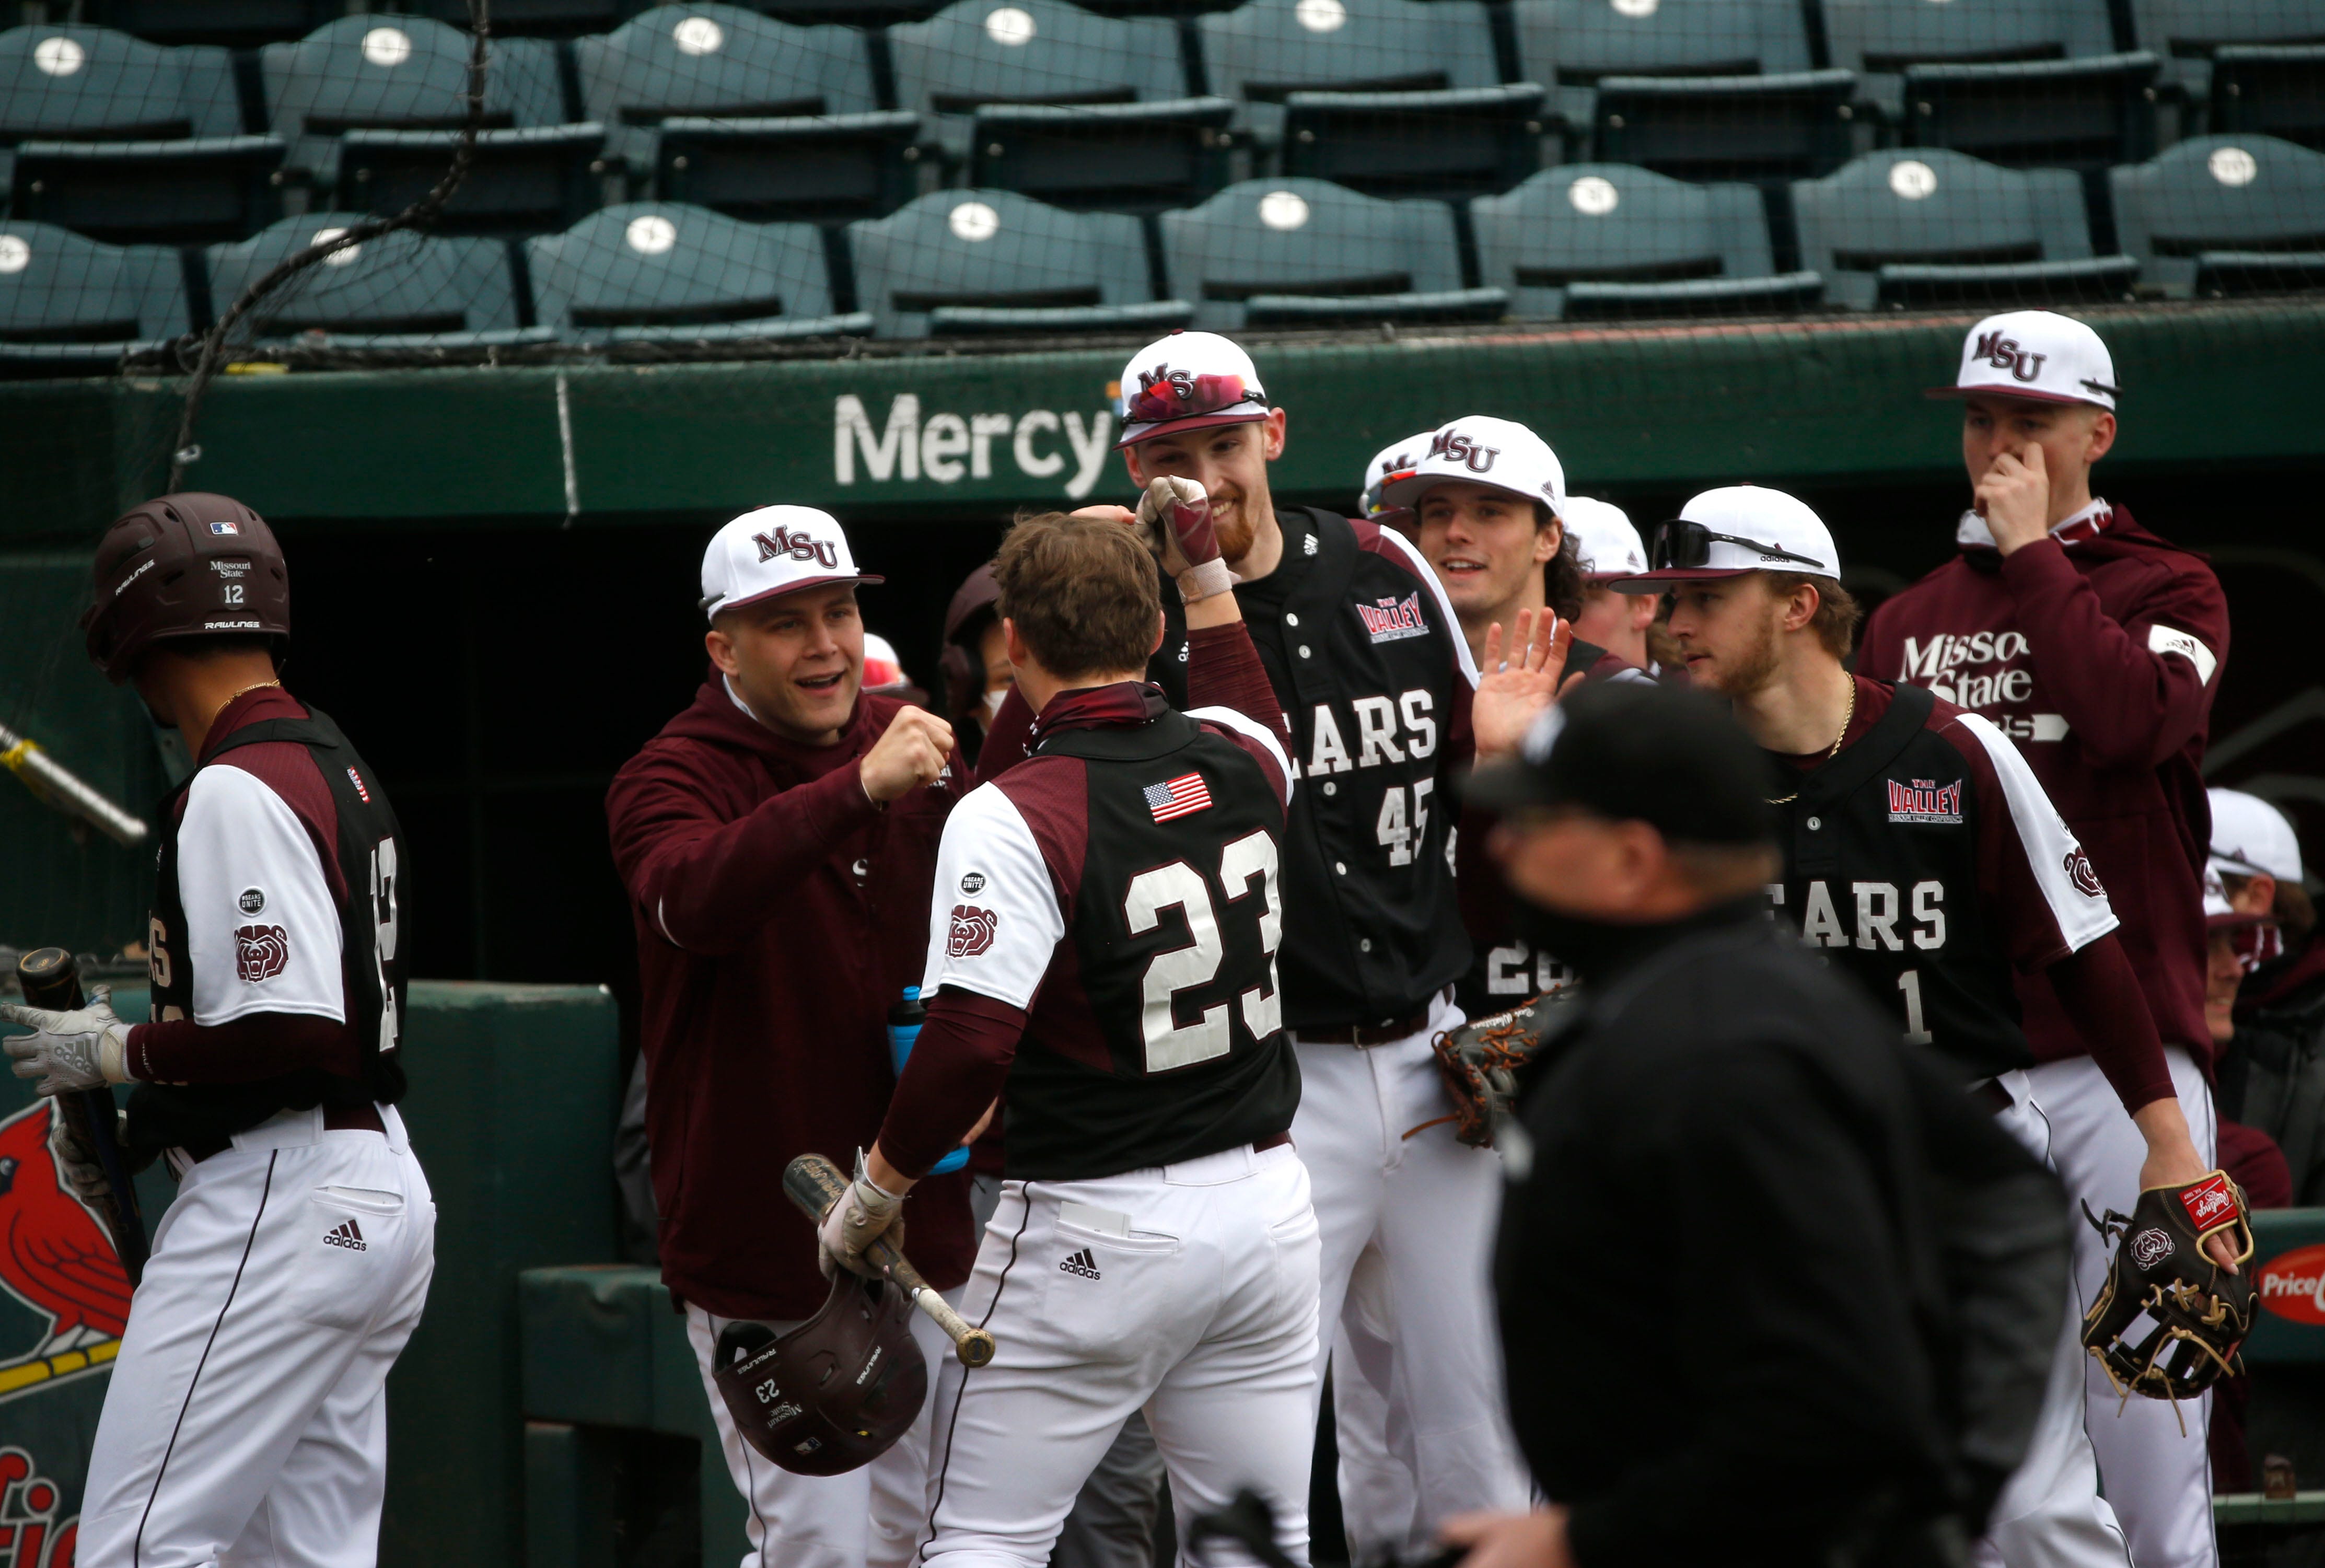 Msu Baseball Schedule 2022 Missouri State Baseball: Previewing The Bears Heading Into 2022